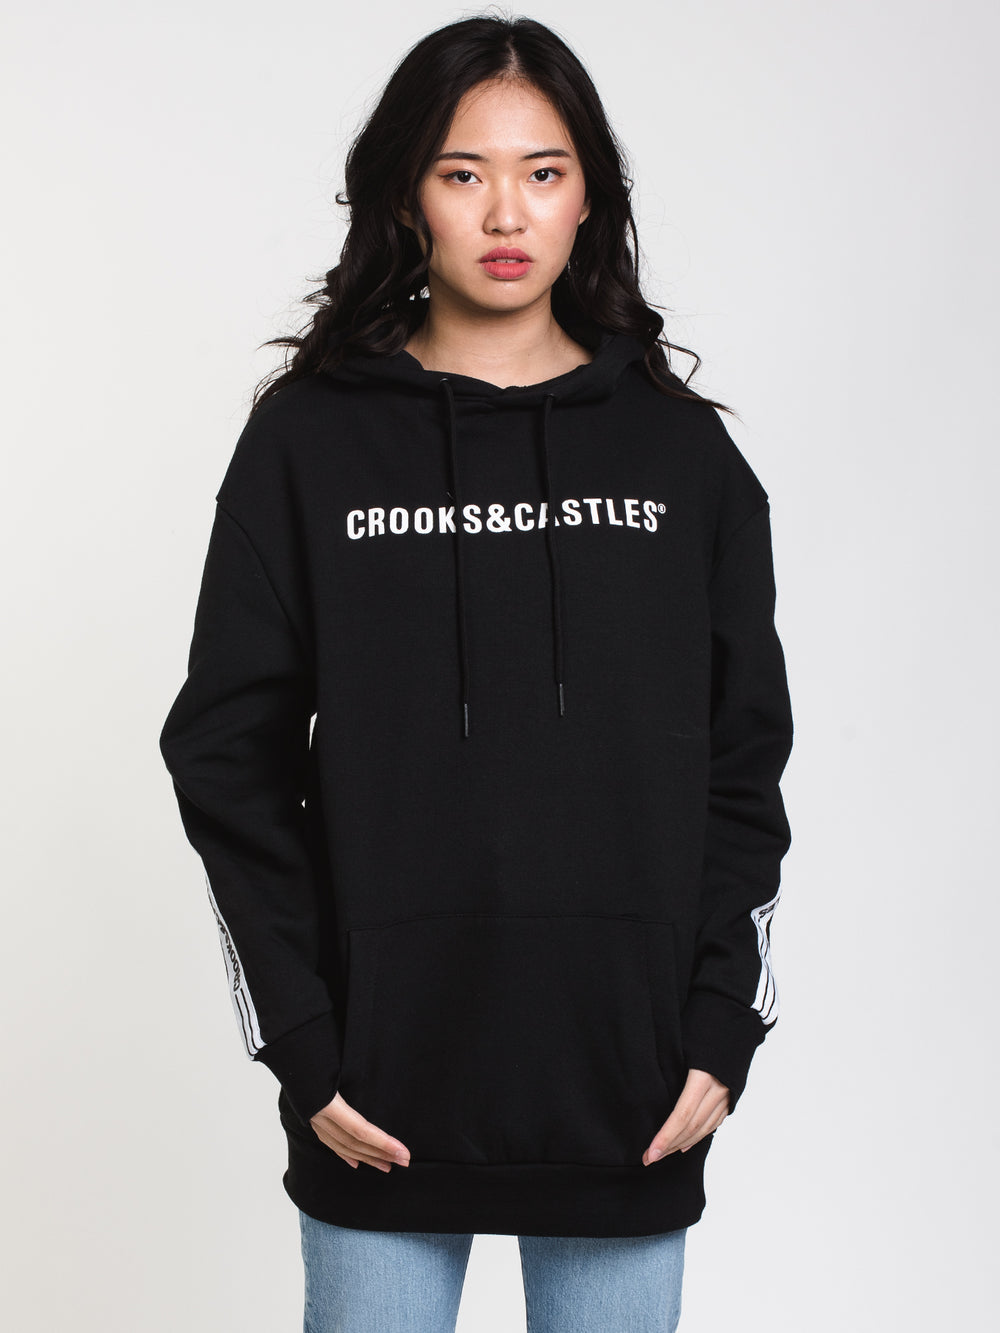 CROOKS & CASTLES TAPE OVER SIZED PULLOVER HOODIE  - CLEARANCE